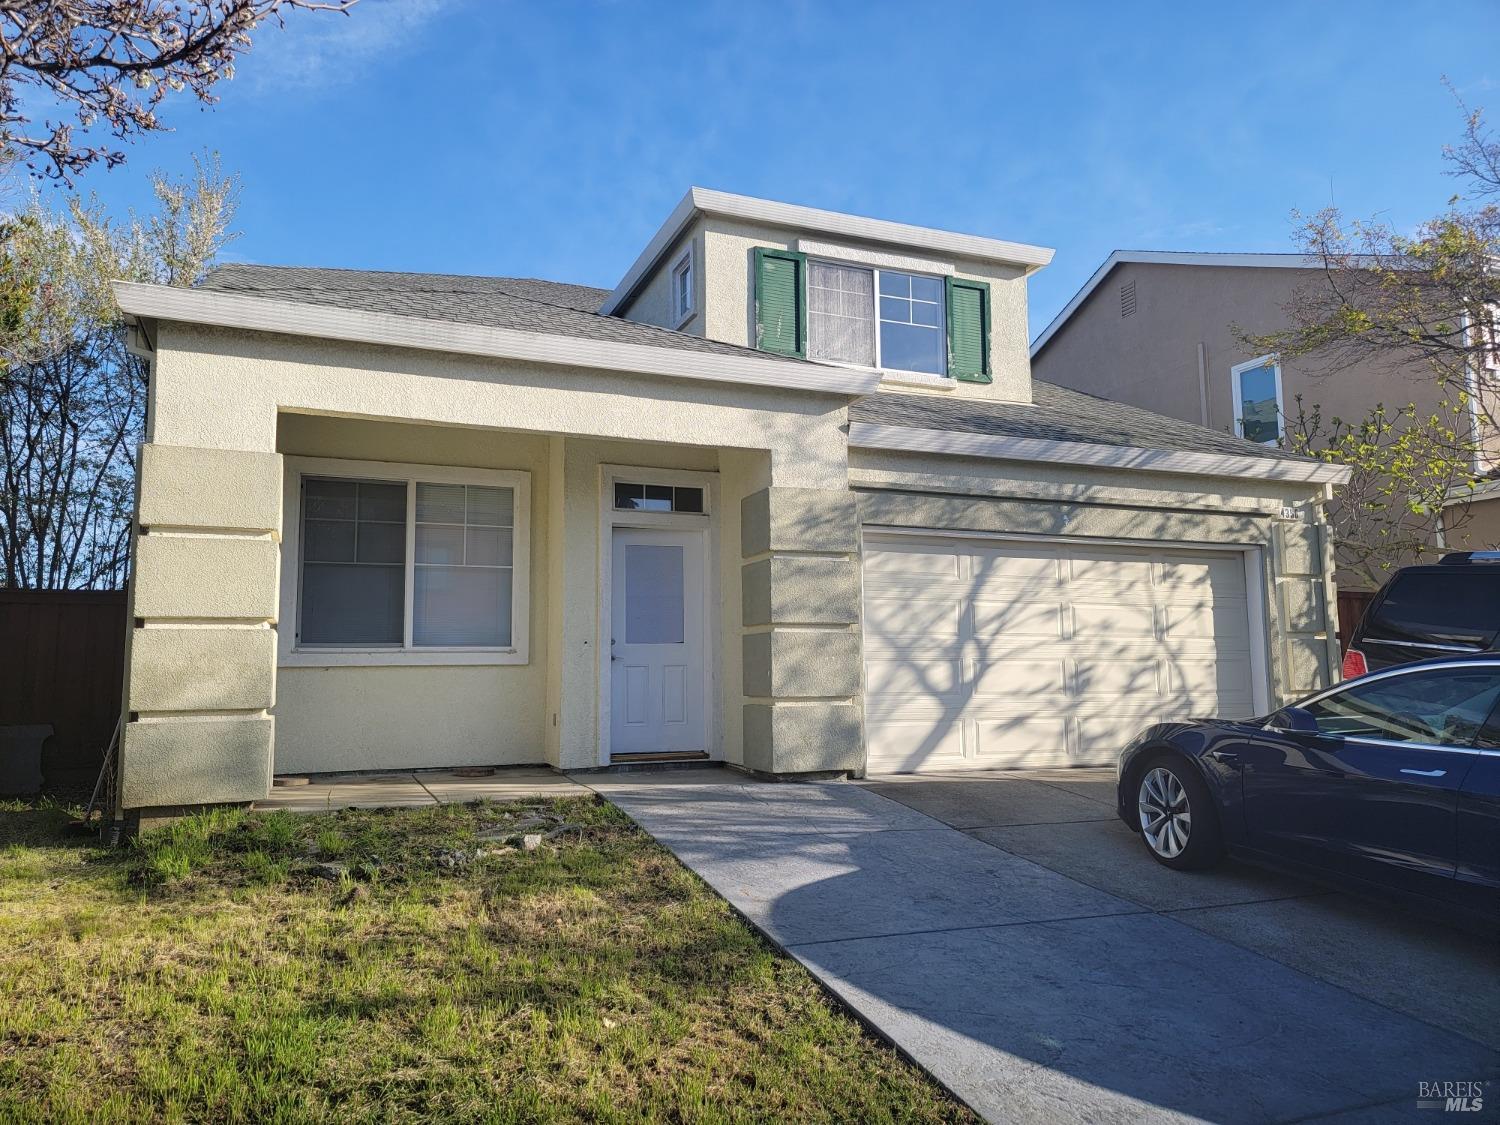 Photo of 4356 Melody Ln in Vallejo, CA